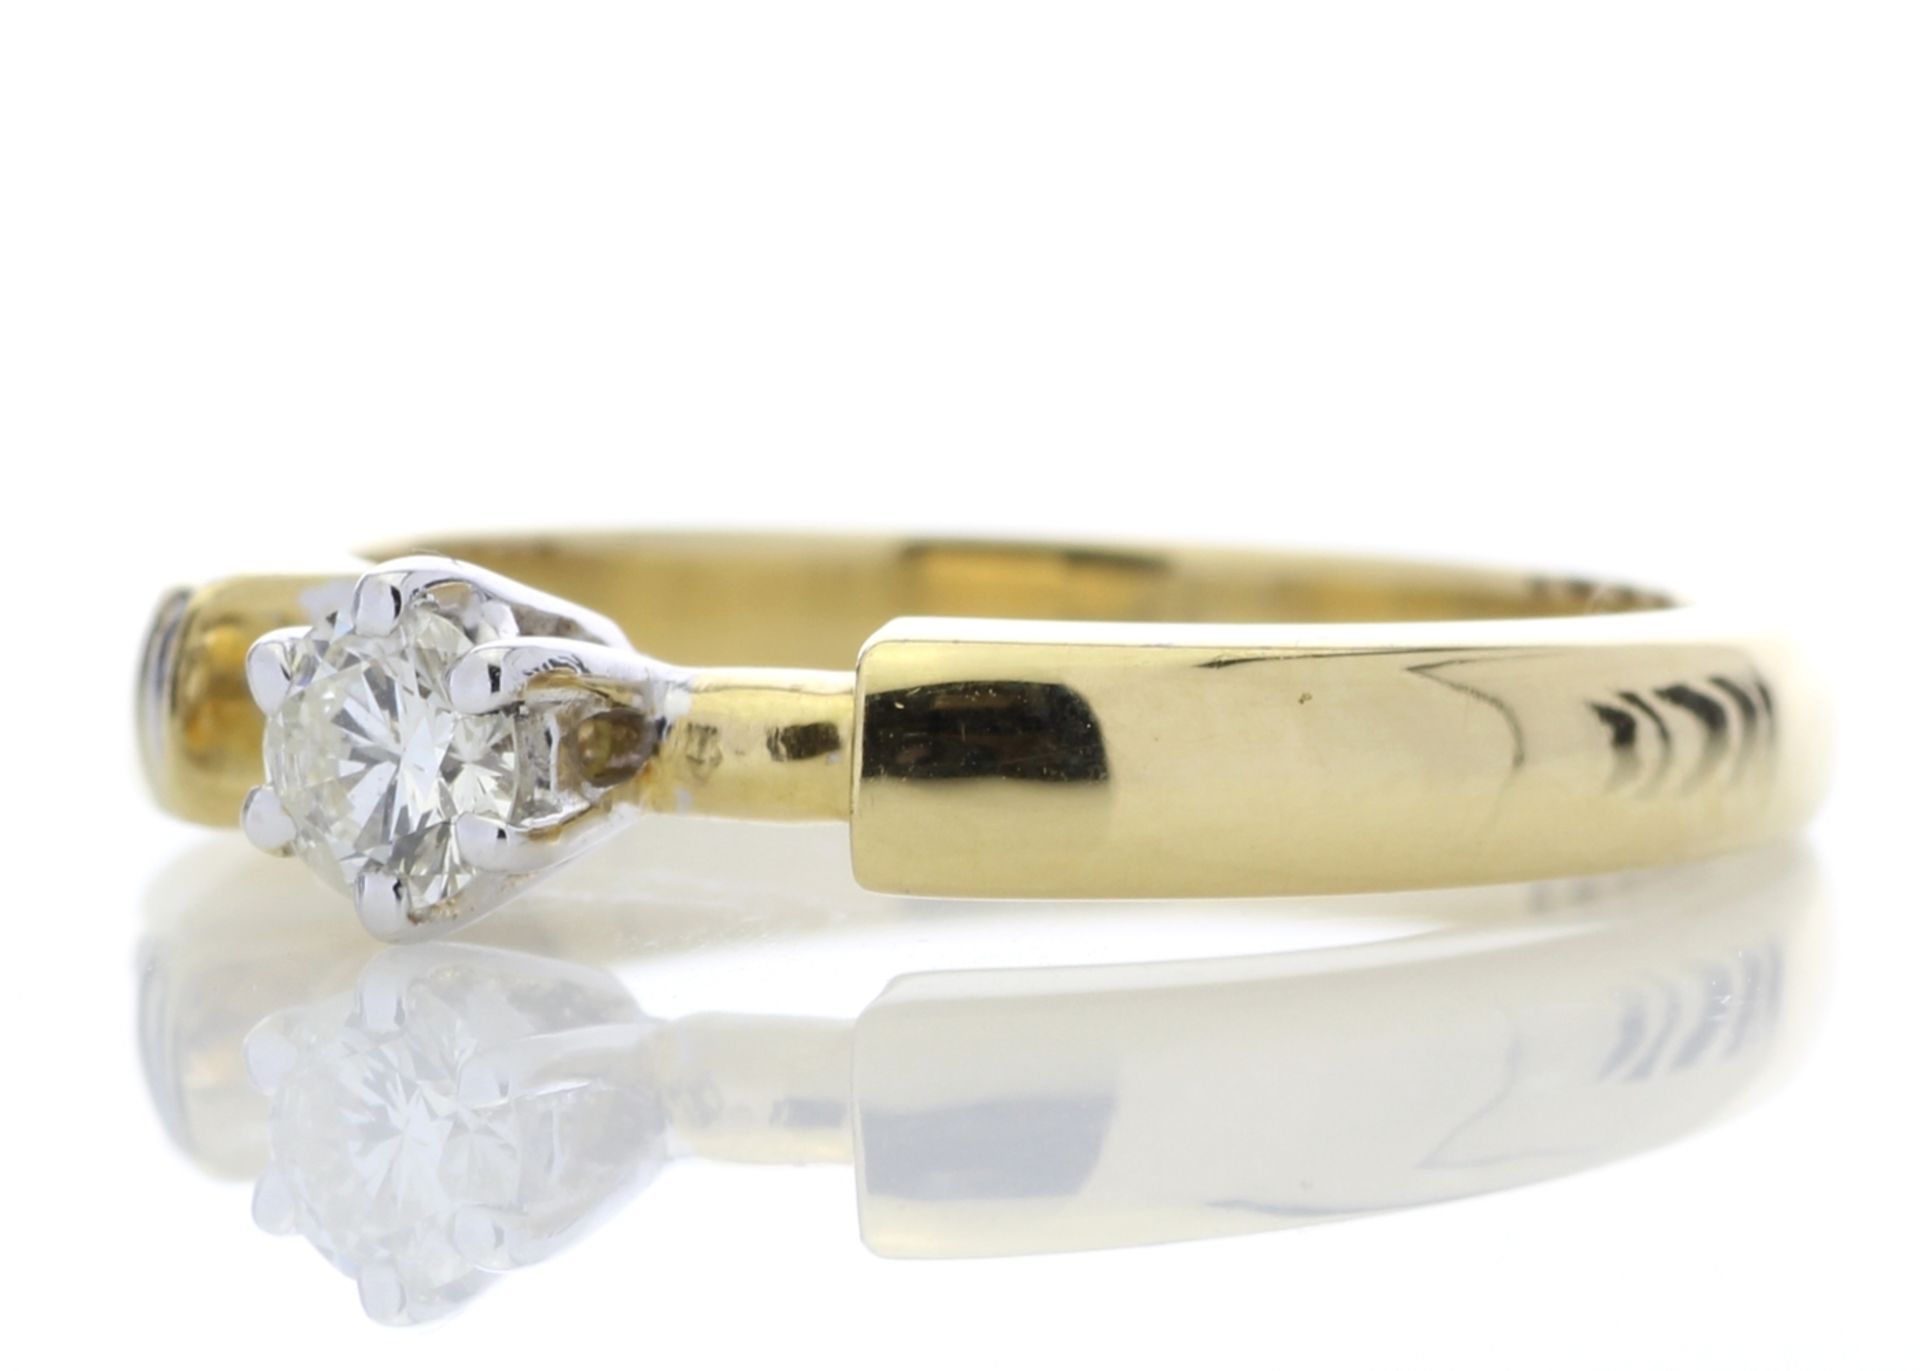 18ct Single Stone Fancy Claw Set Diamond Ring 0.20 Carats - Valued By GIE £3,790.00 - A beautiful - Image 2 of 9